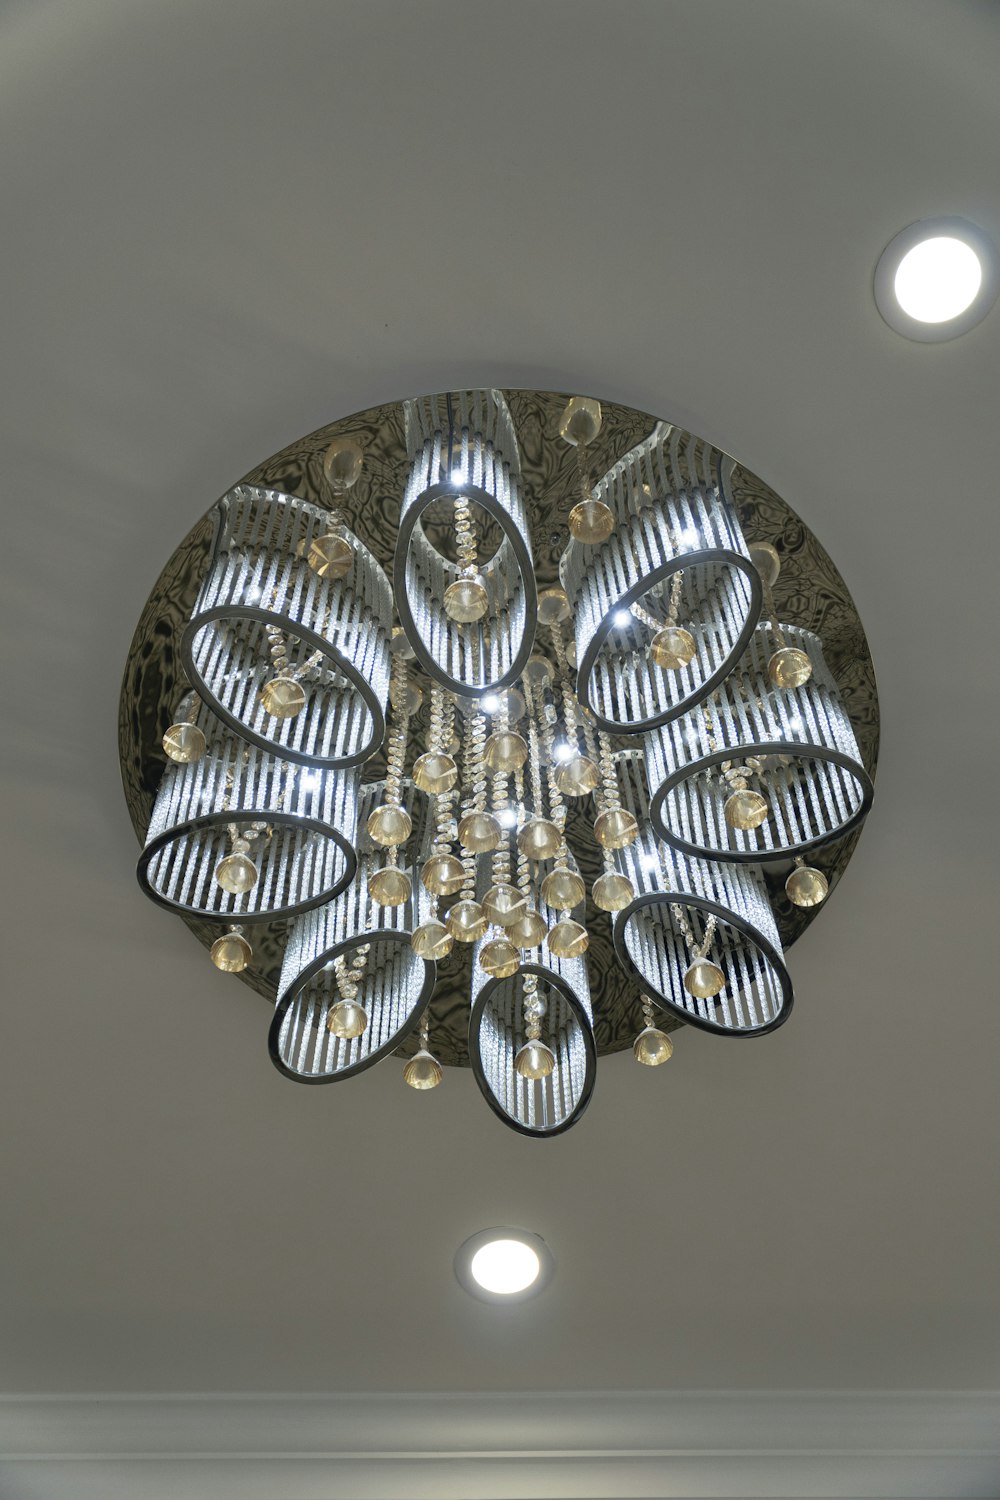 a circular light fixture hanging from the ceiling